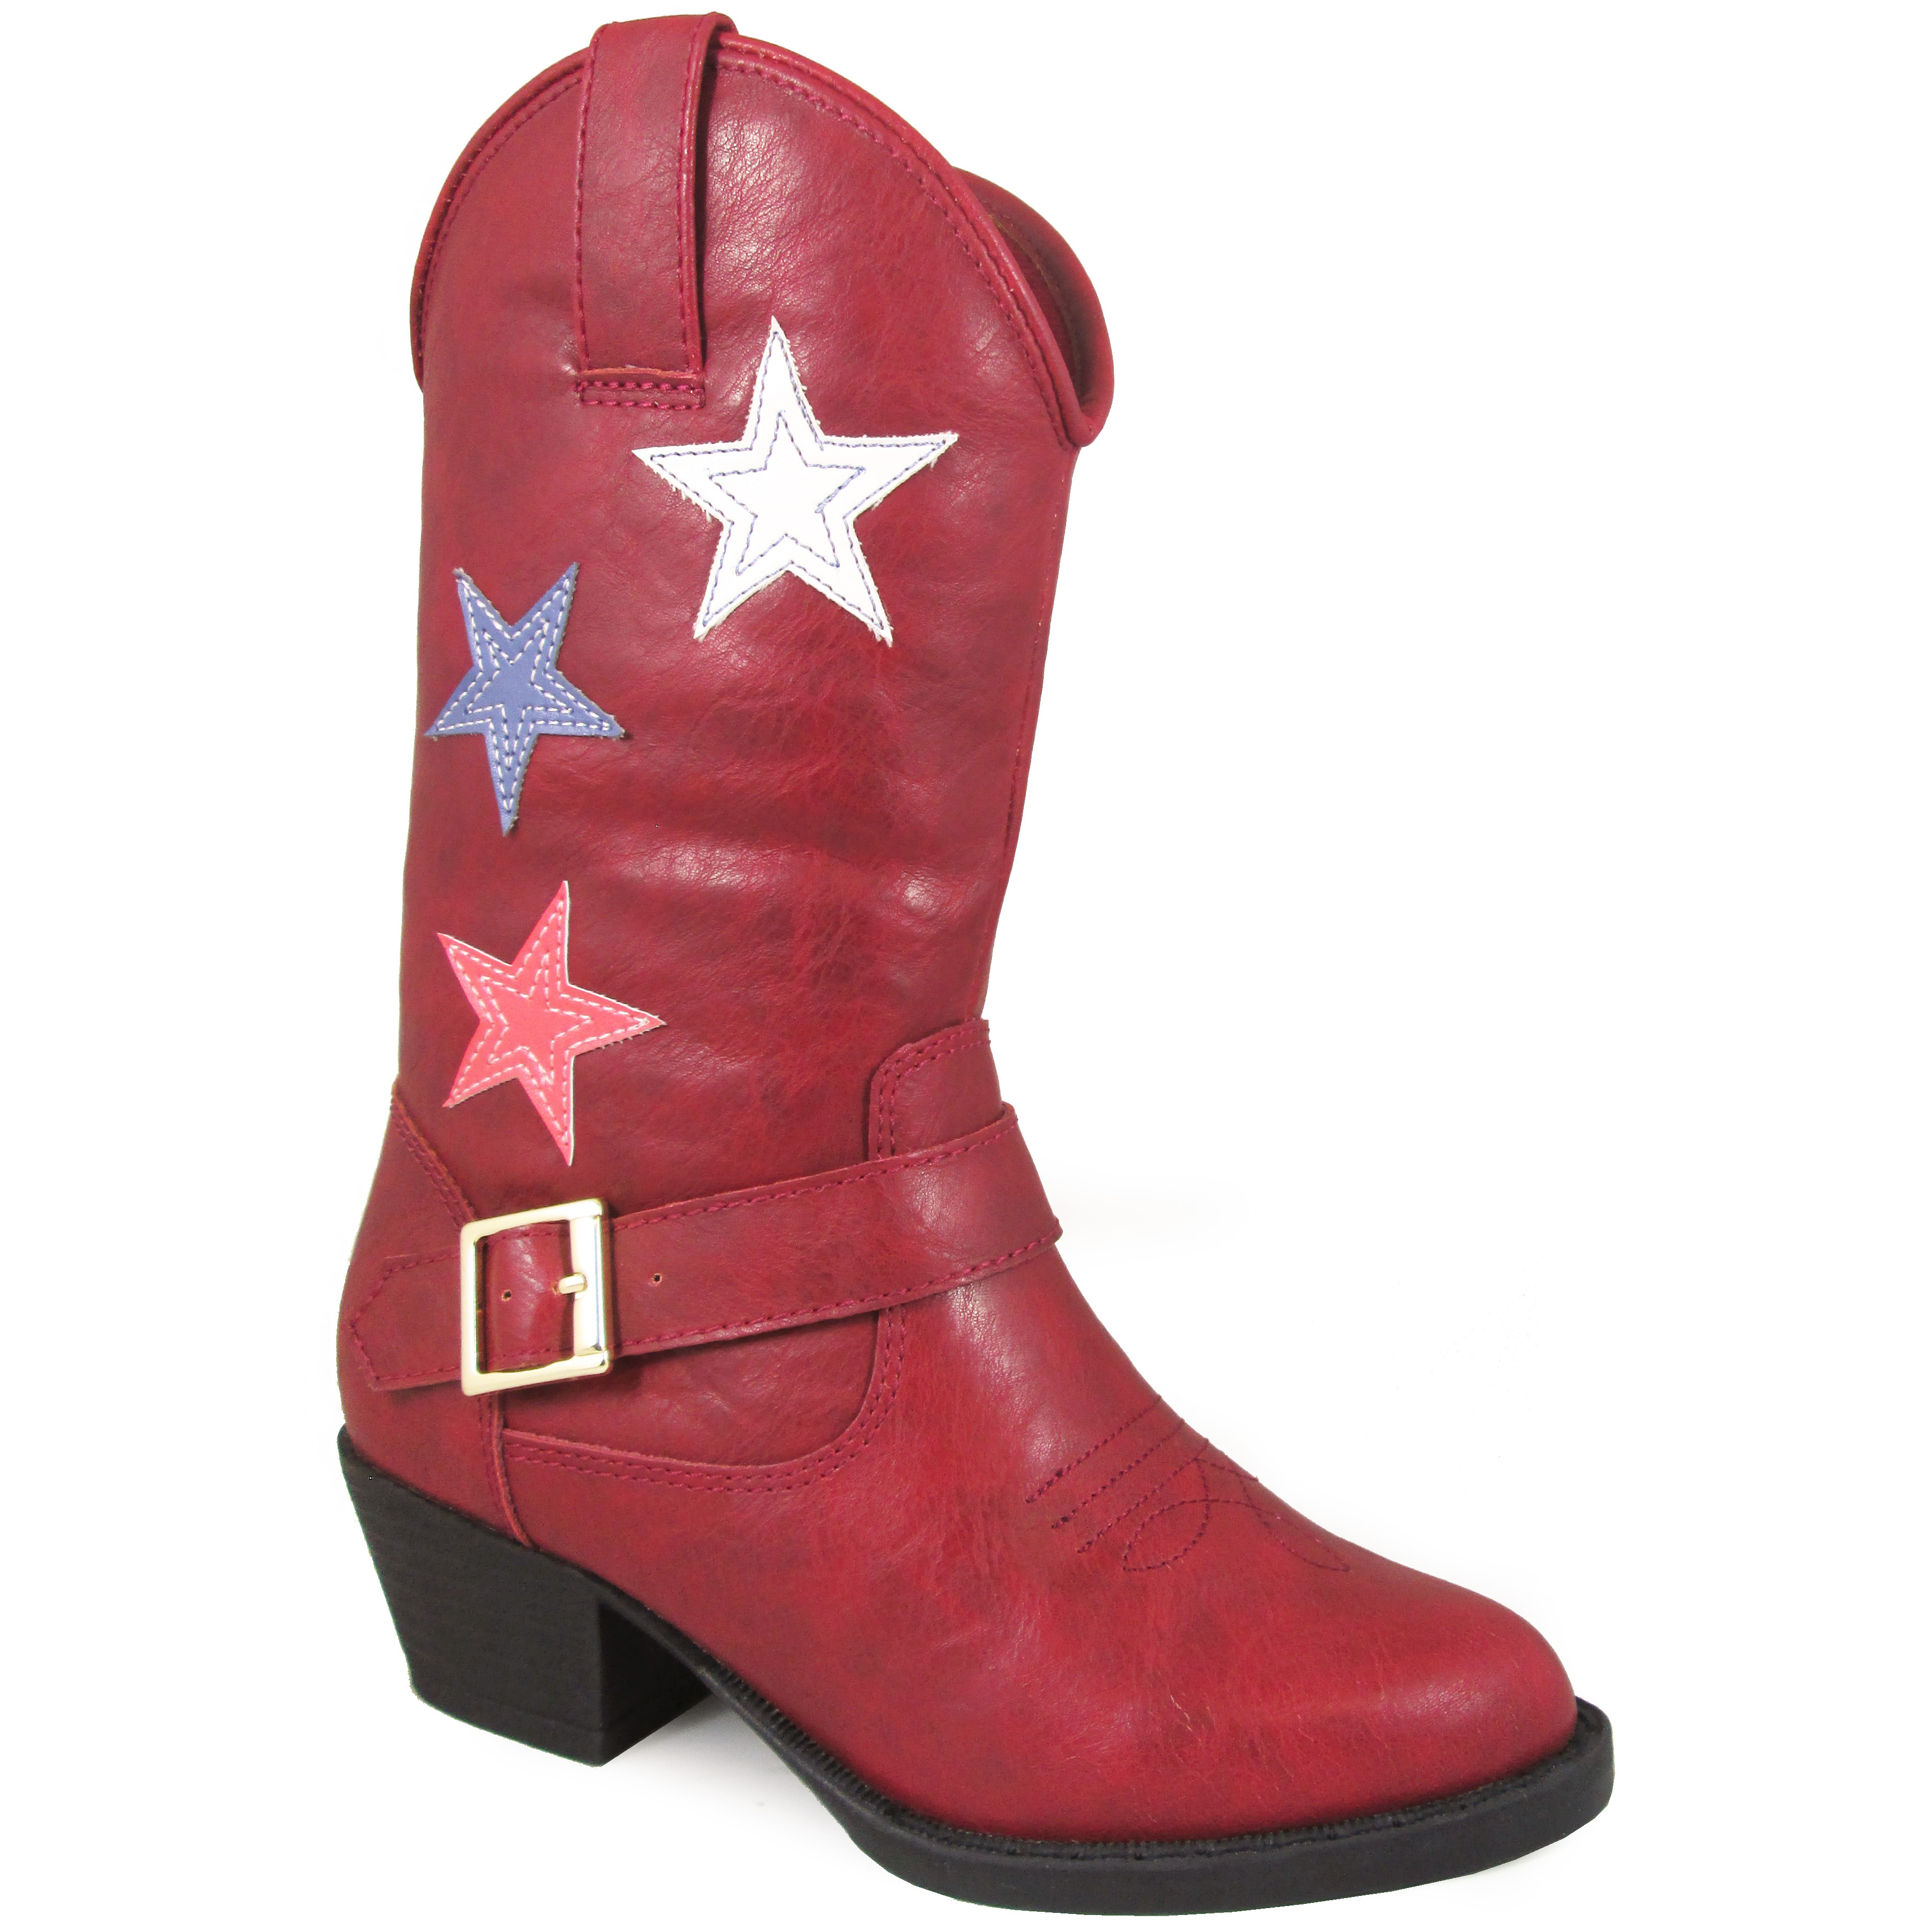 Smoky Mountain Boots Kid's Star Bright Red Cowboy Riding Boot